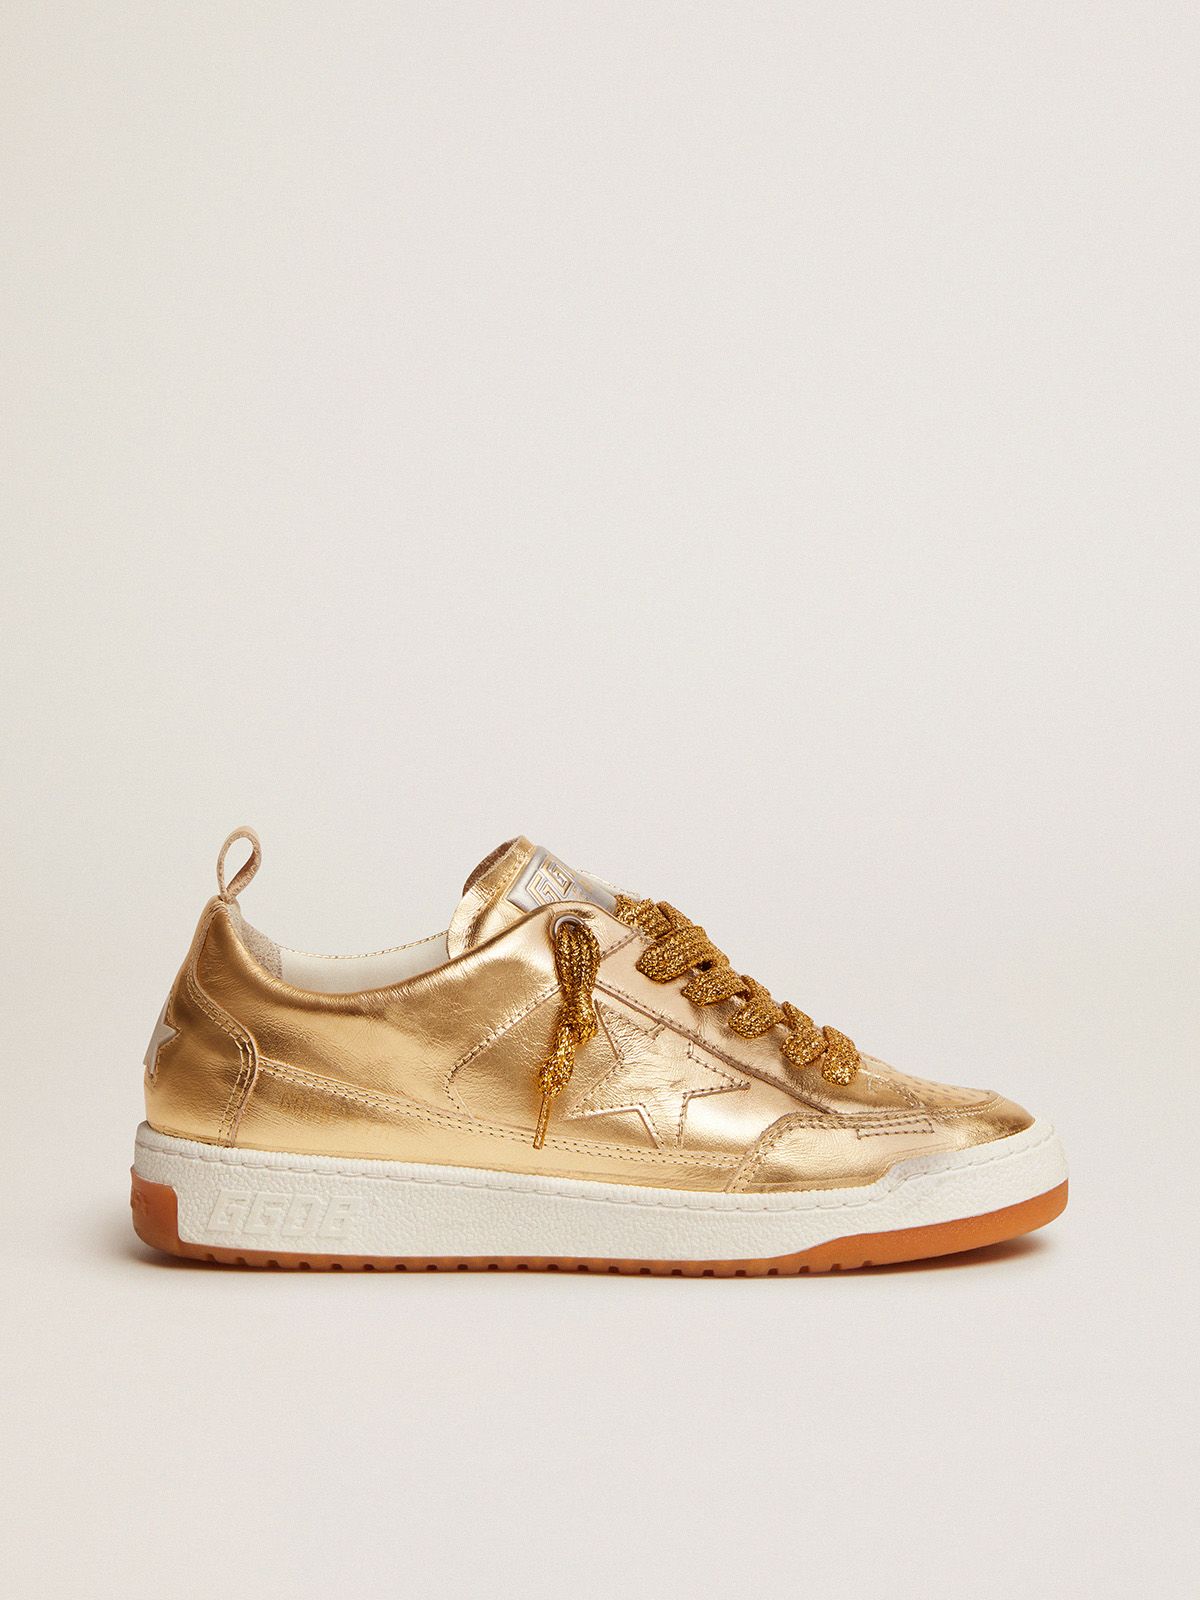 golden goose sneakers in leather gold laminated Yeah